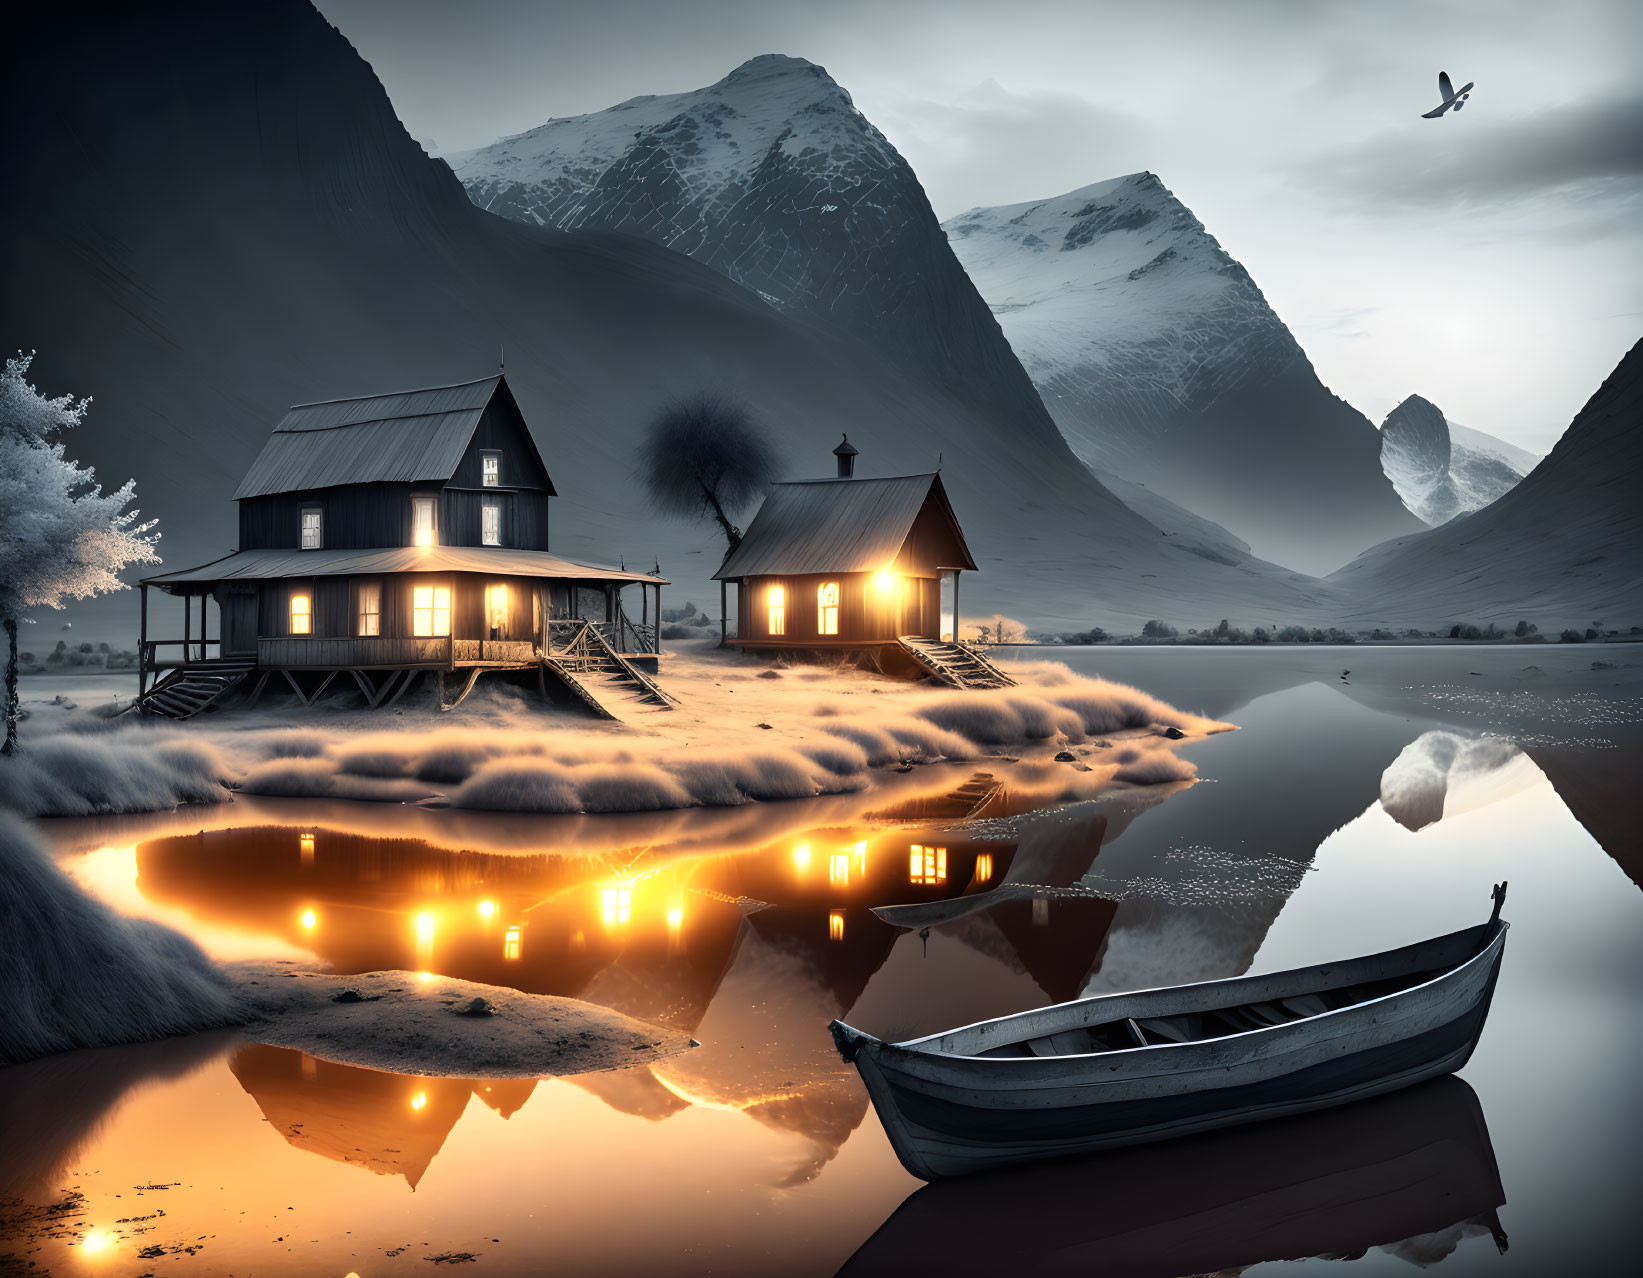 Illuminated Houses by Calm Lake at Twilight with Snow-Covered Peaks